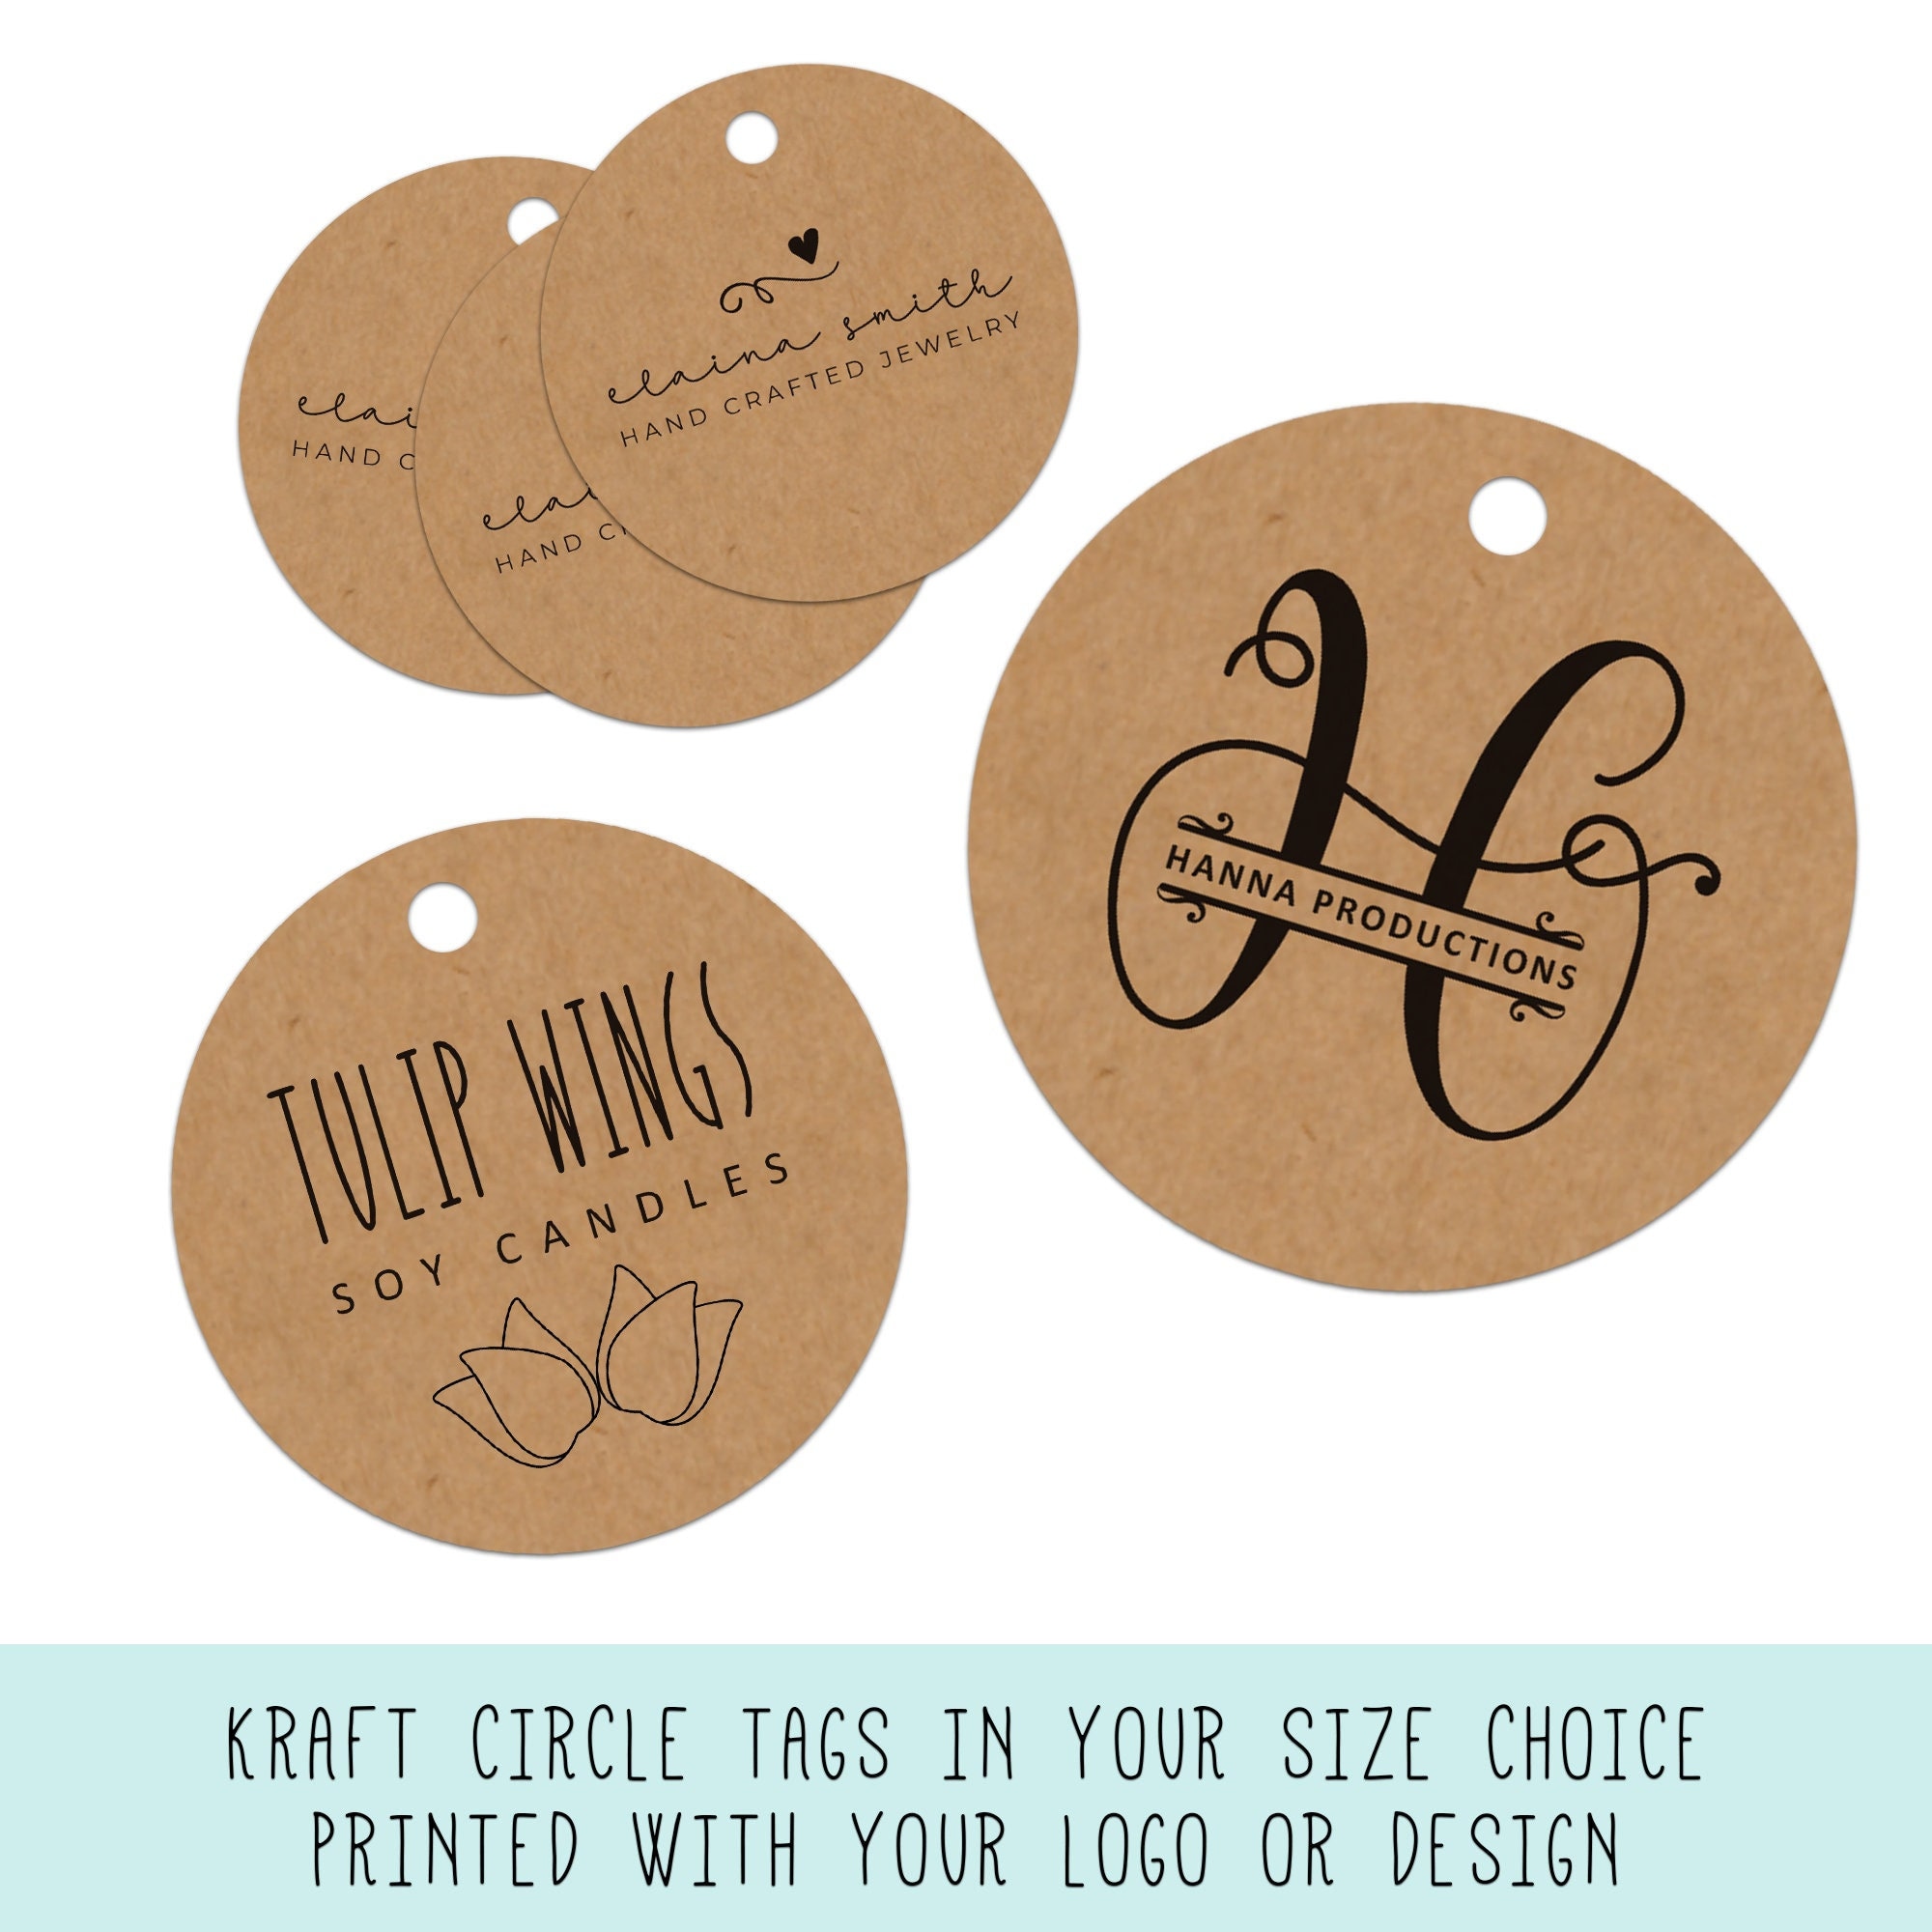 Wholesale Custom Kraft Brown Tags for Labeling Gifts, Wedding